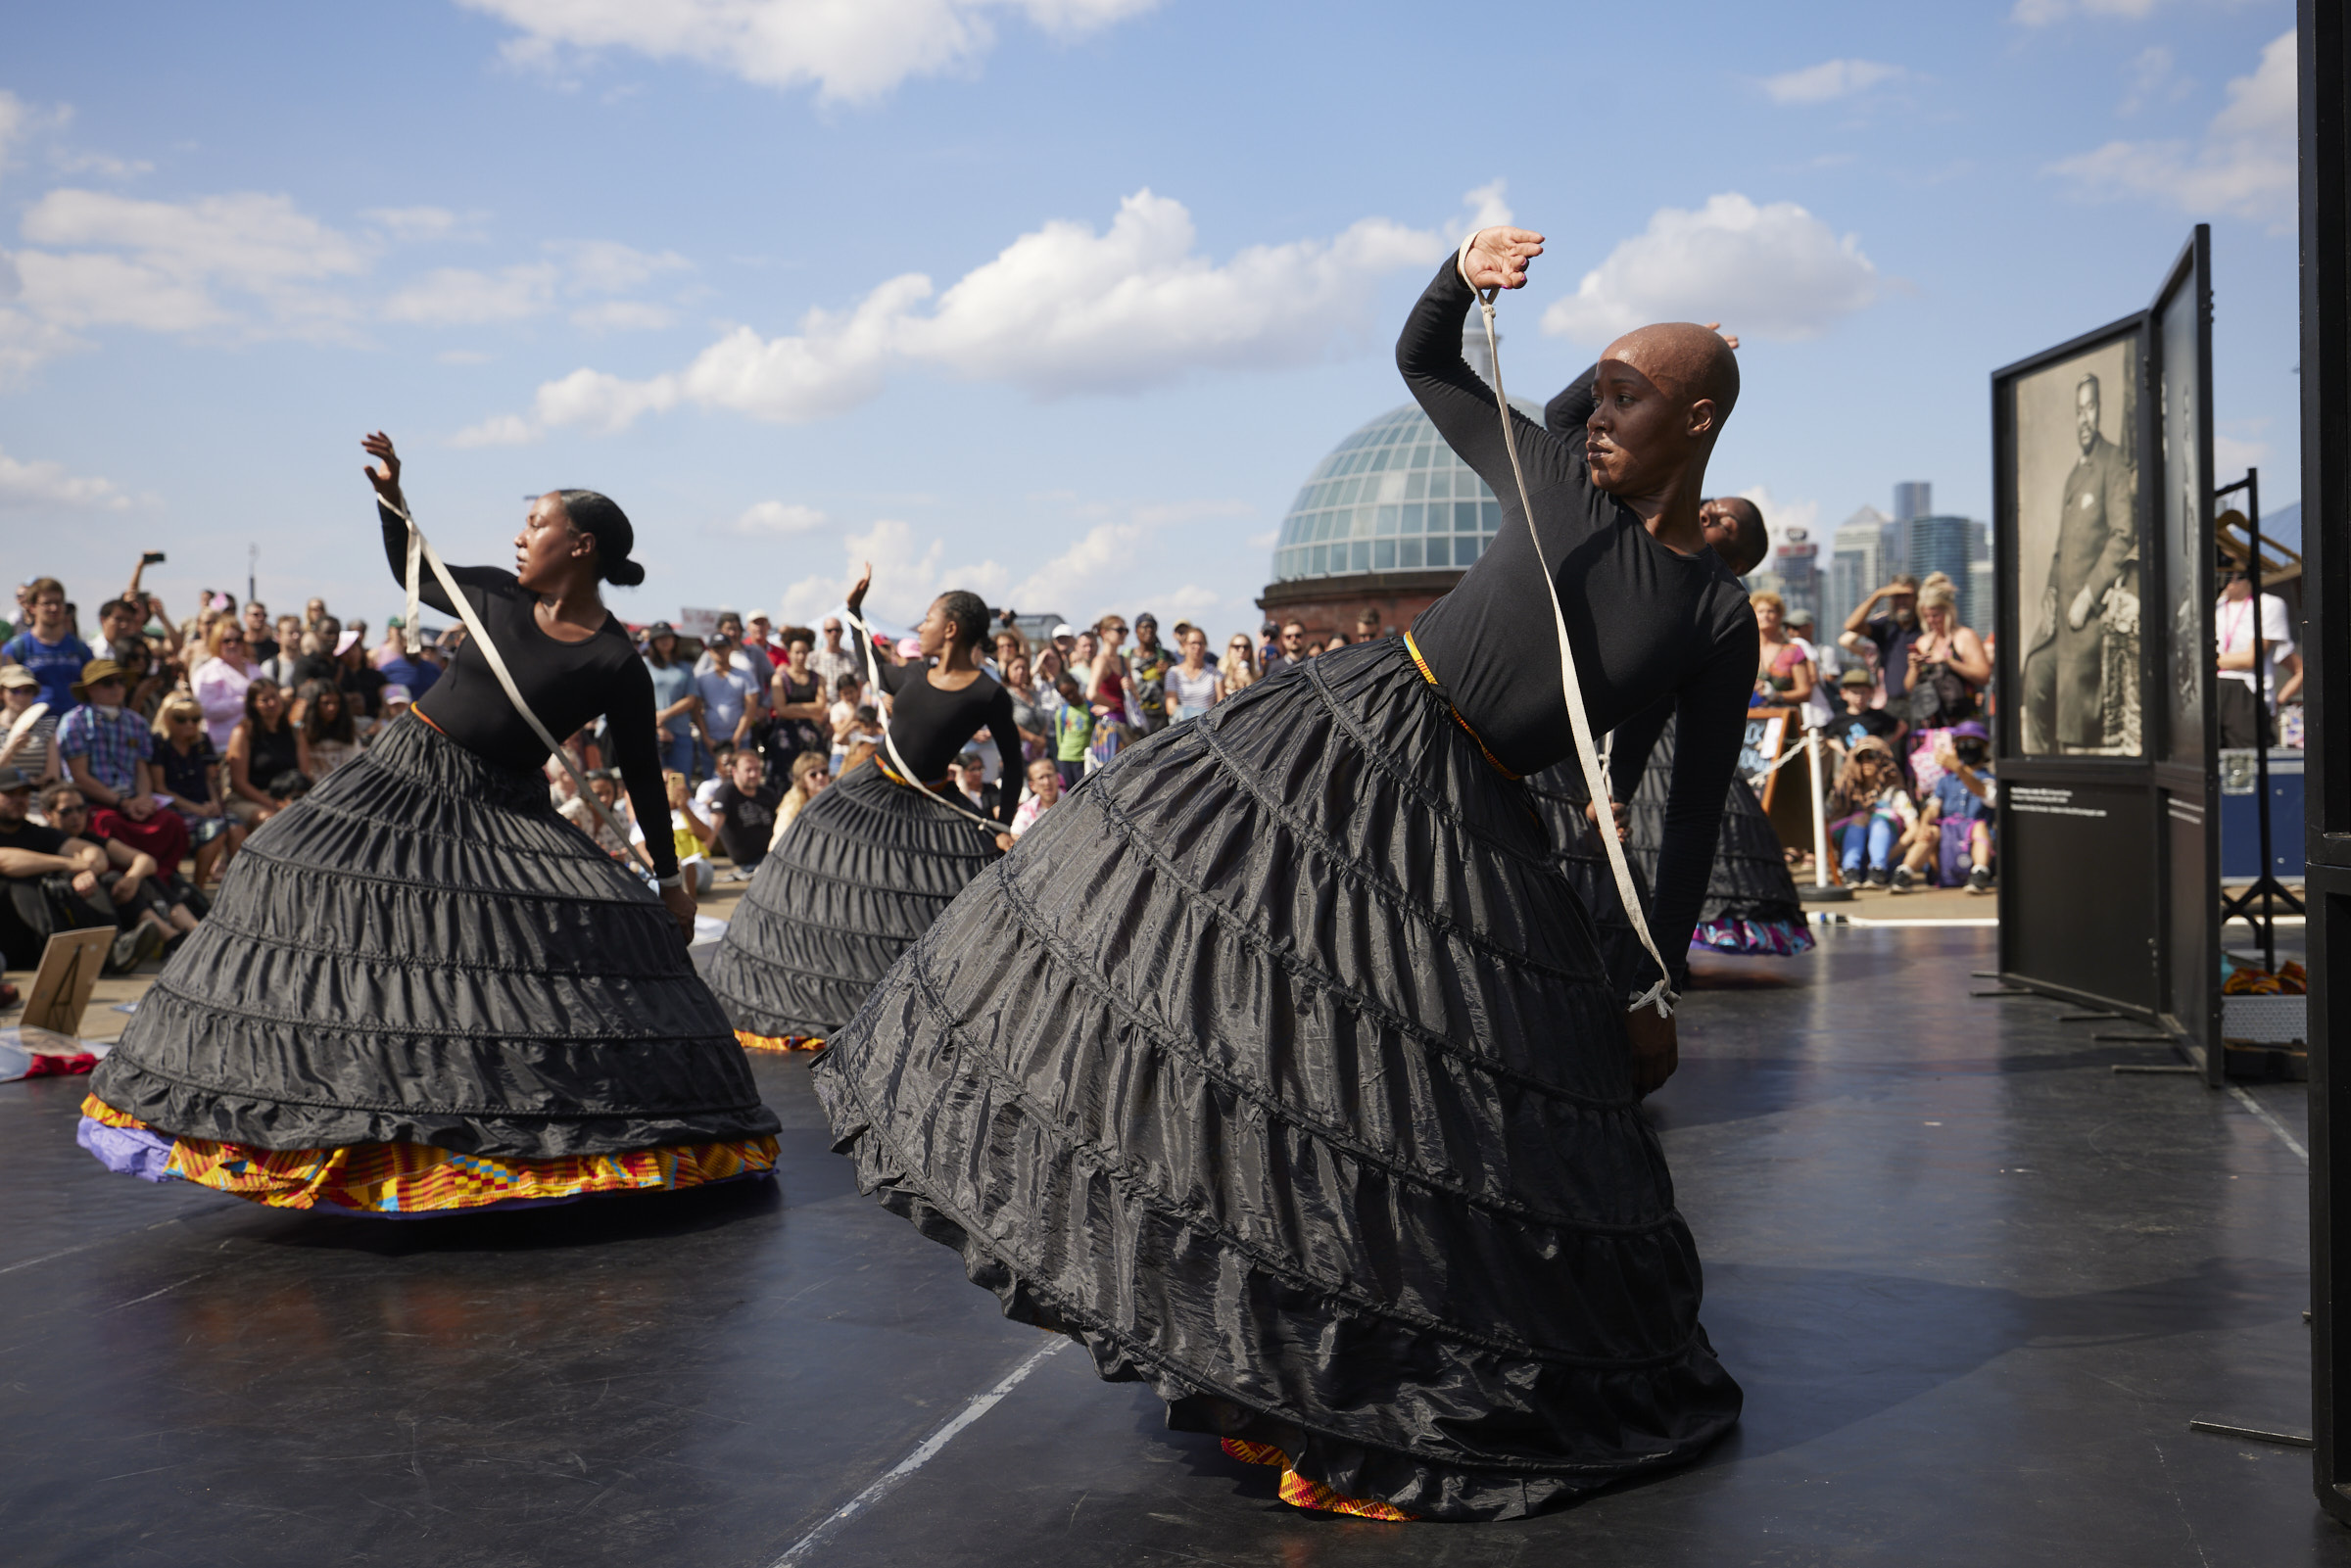 Performers are wearing black tops with large black cage skirts that are on top of colourful cage skirts underneath. All of them are bound by a rope from wrist to wrist. It is a sunny day and they are surrounded by a crowded audience.